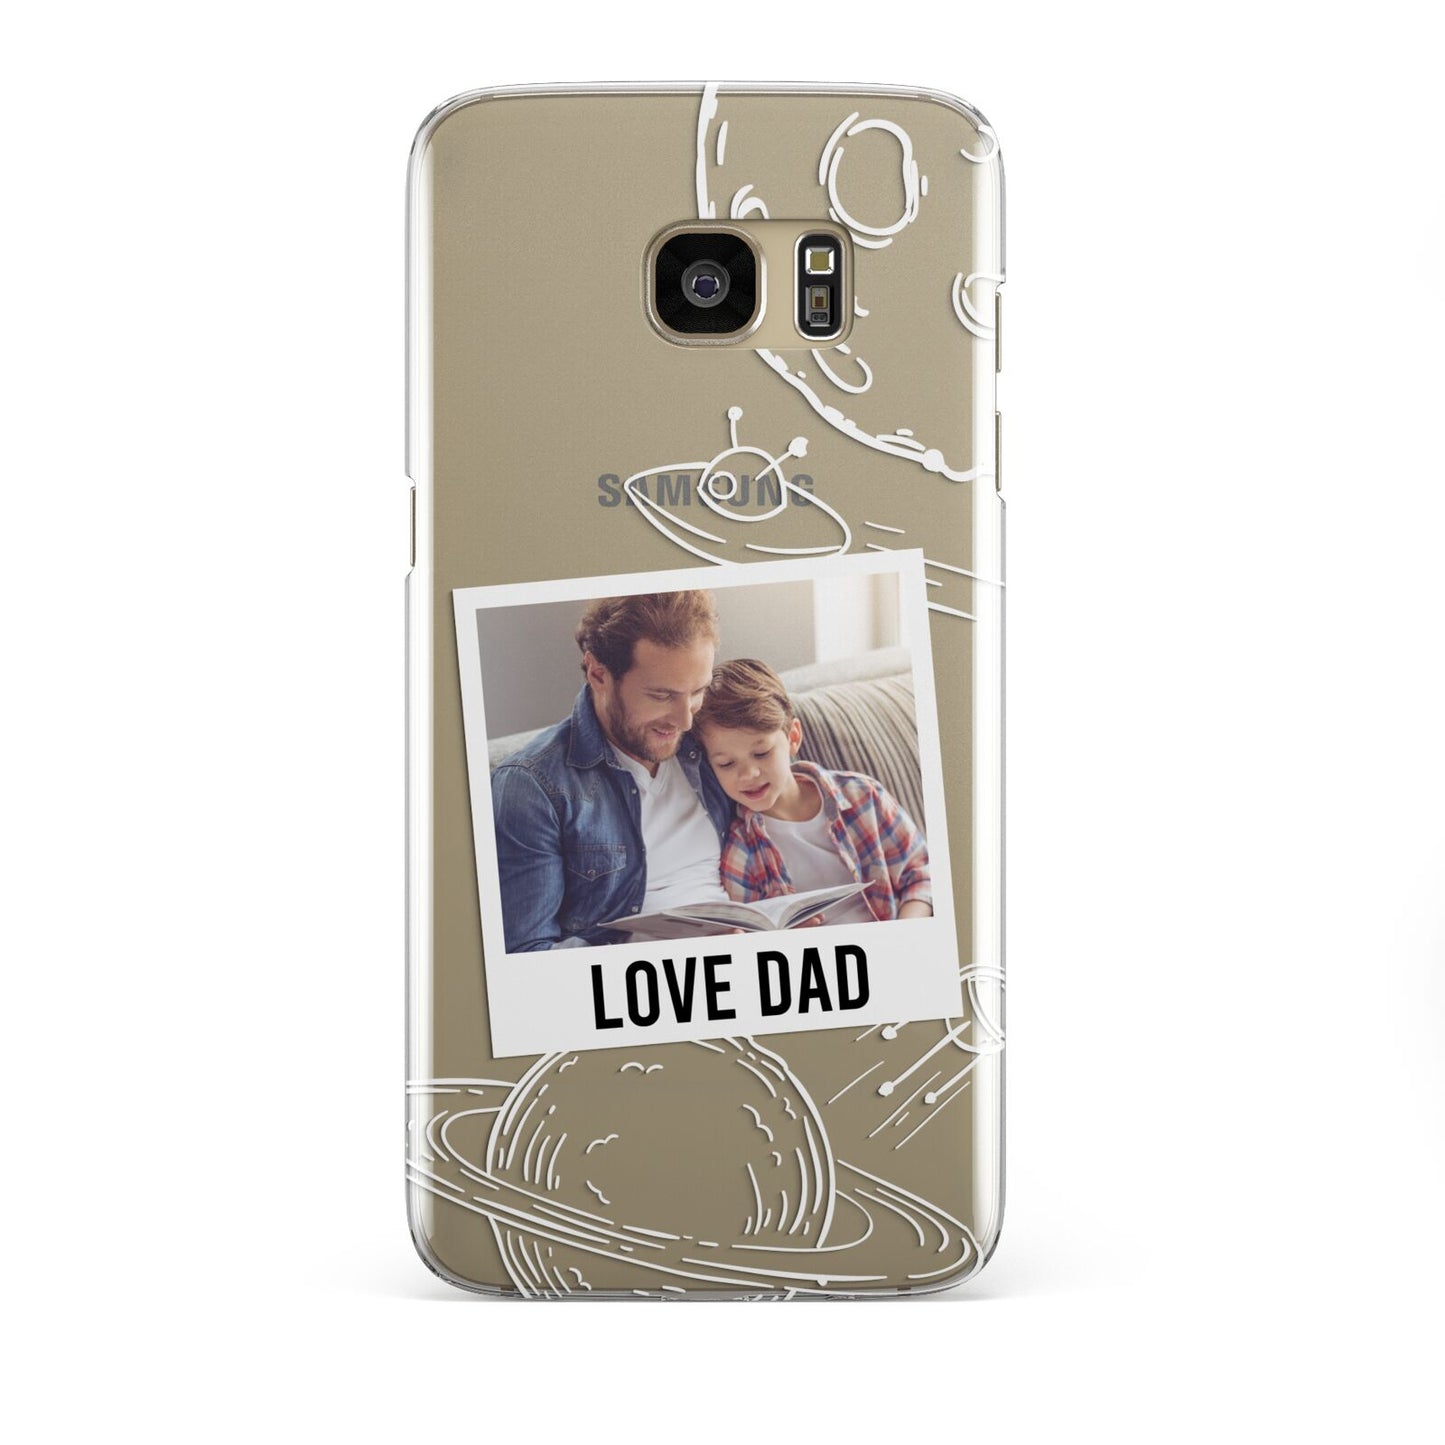 Personalised From Dad Photo Samsung Galaxy S7 Edge Case